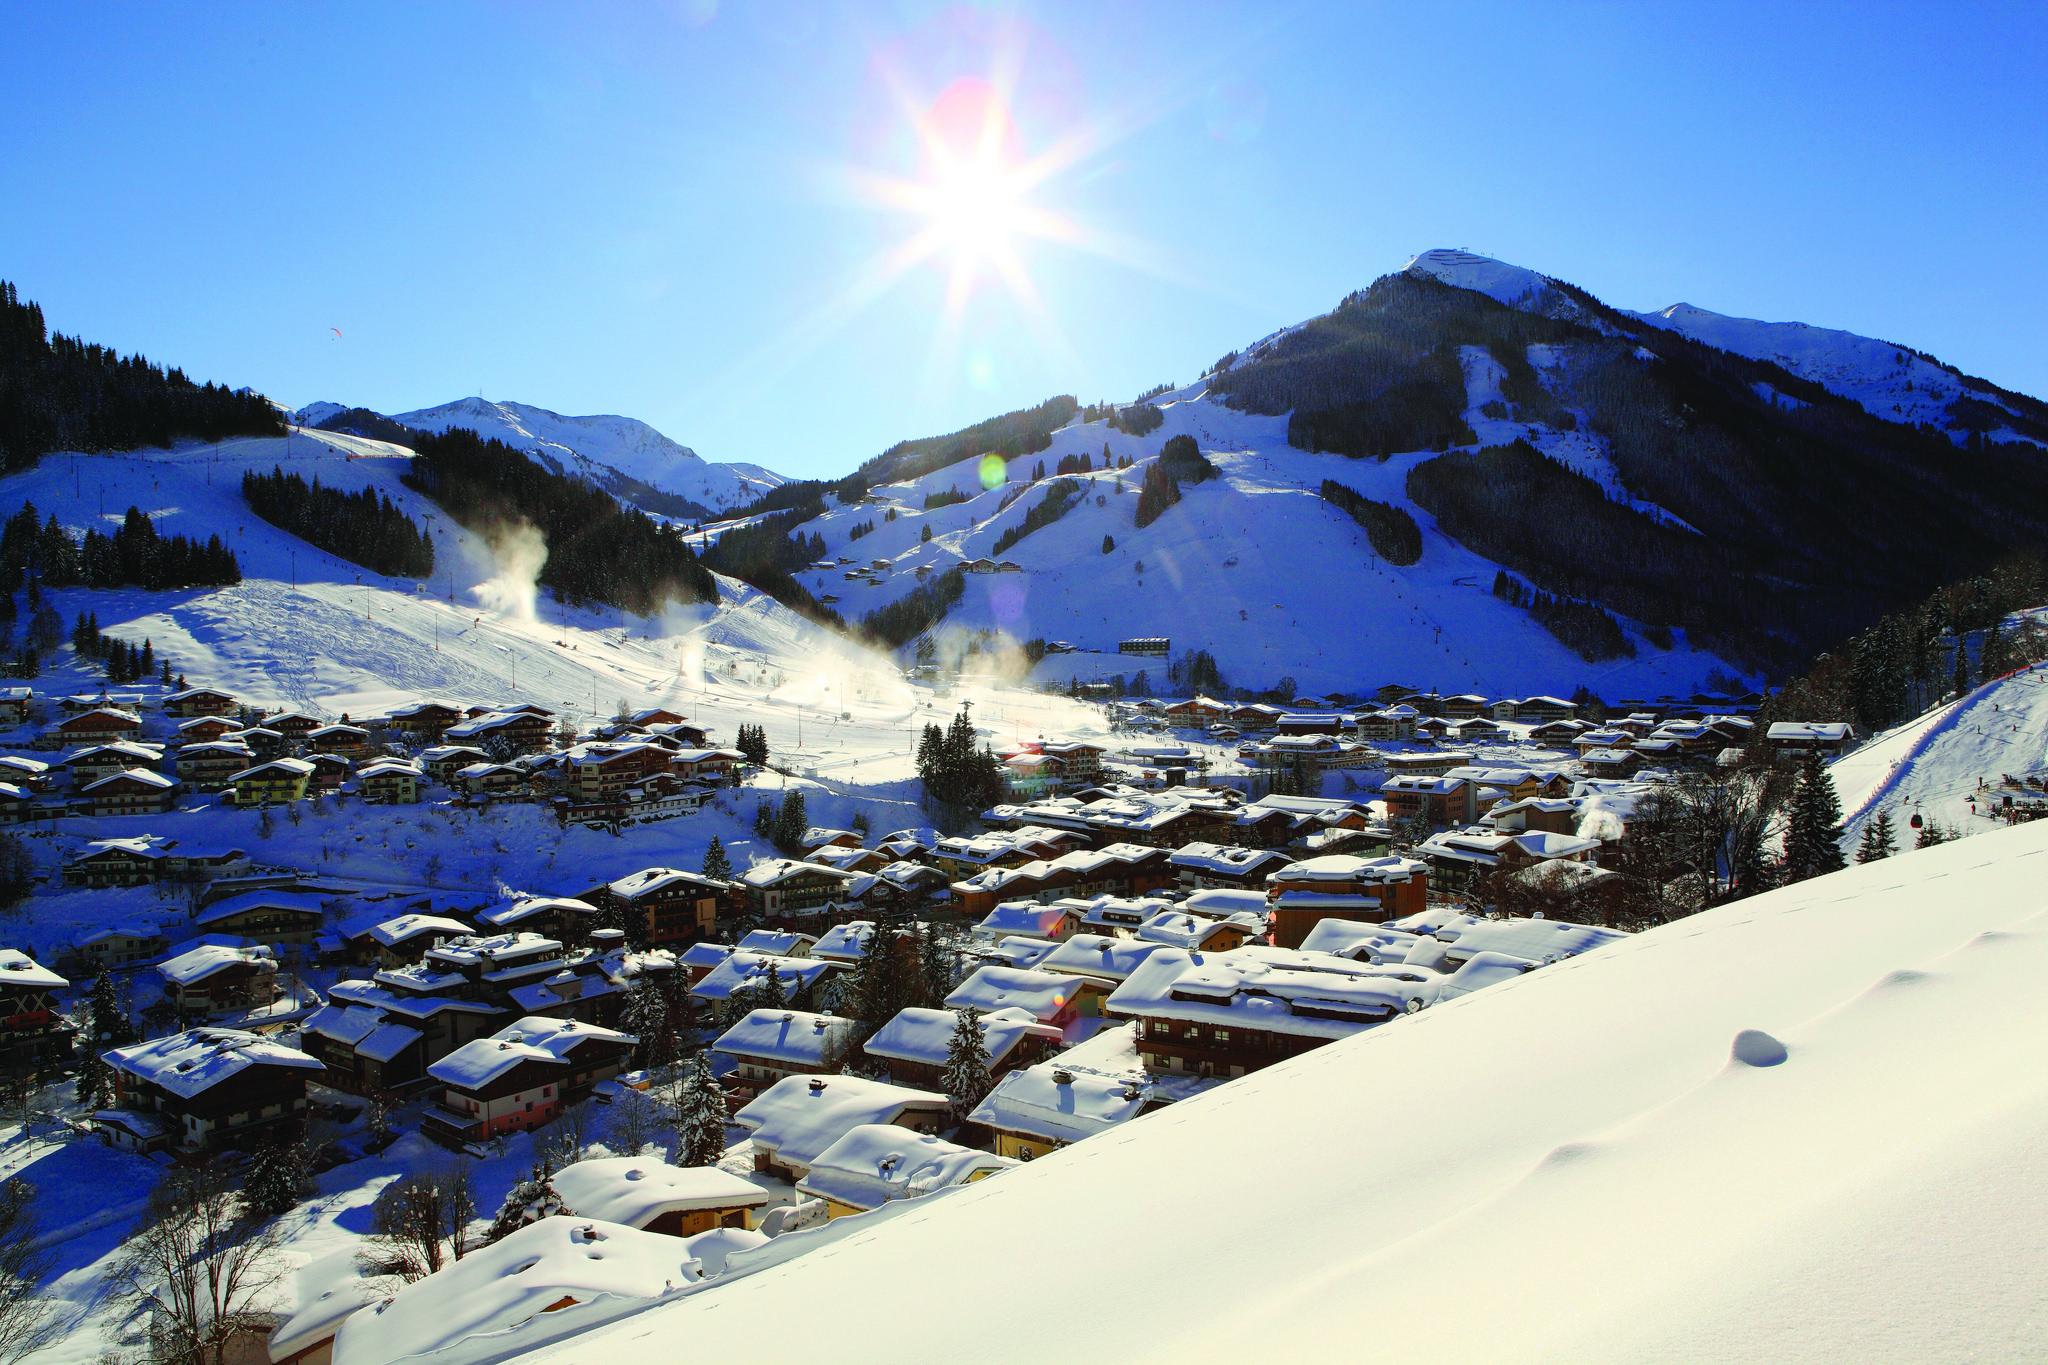 &#13;
Saalbach is part of Austria’s largest ski area – but not for long&#13;